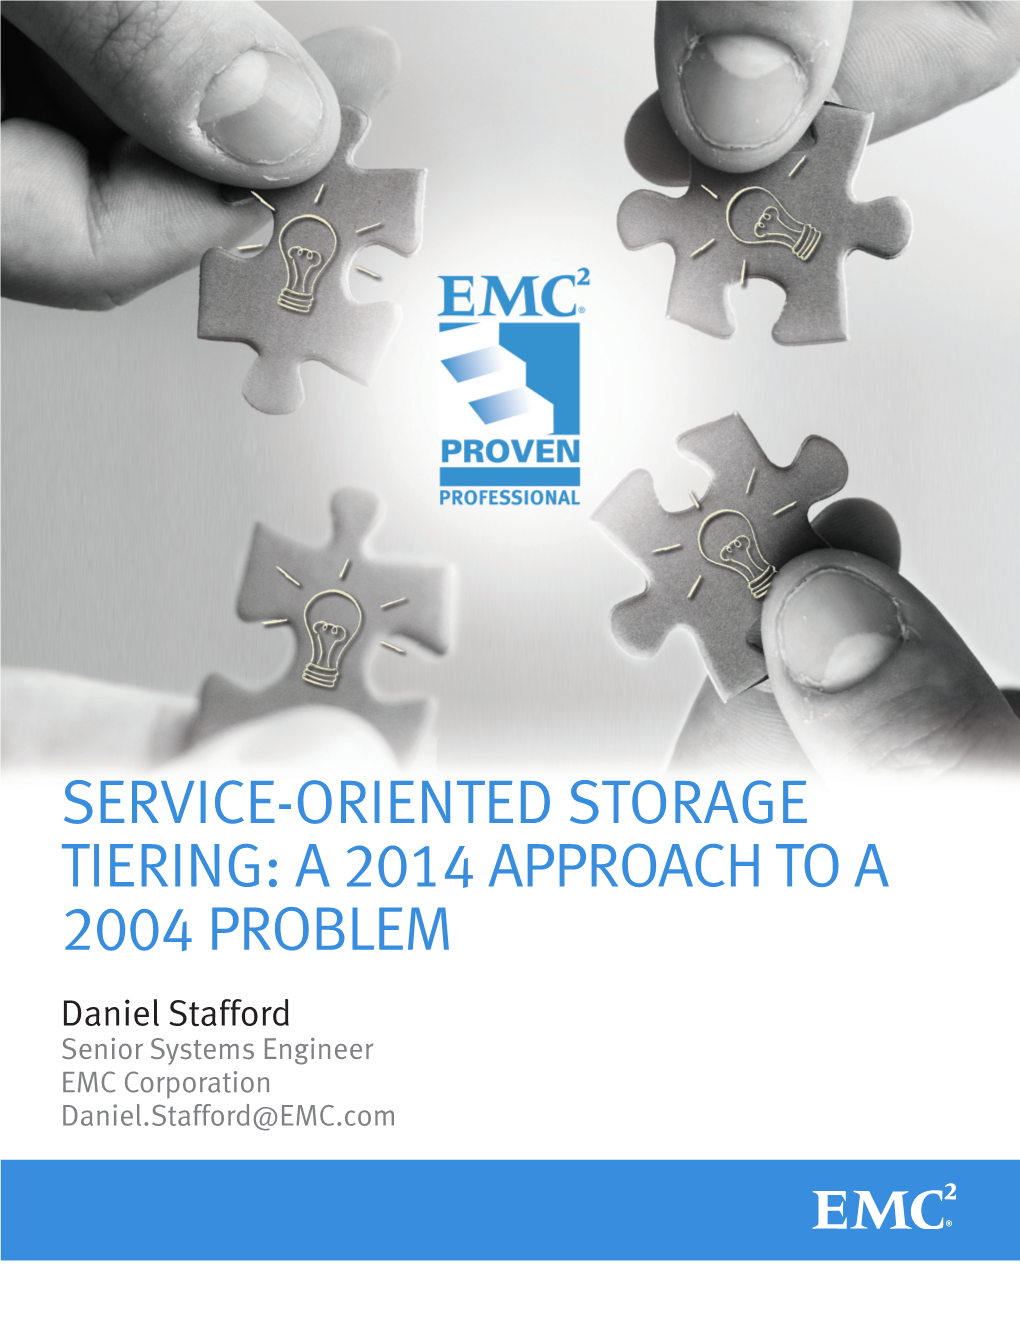 Service-Oriented Storage Tiering: a 2014 Approach to A